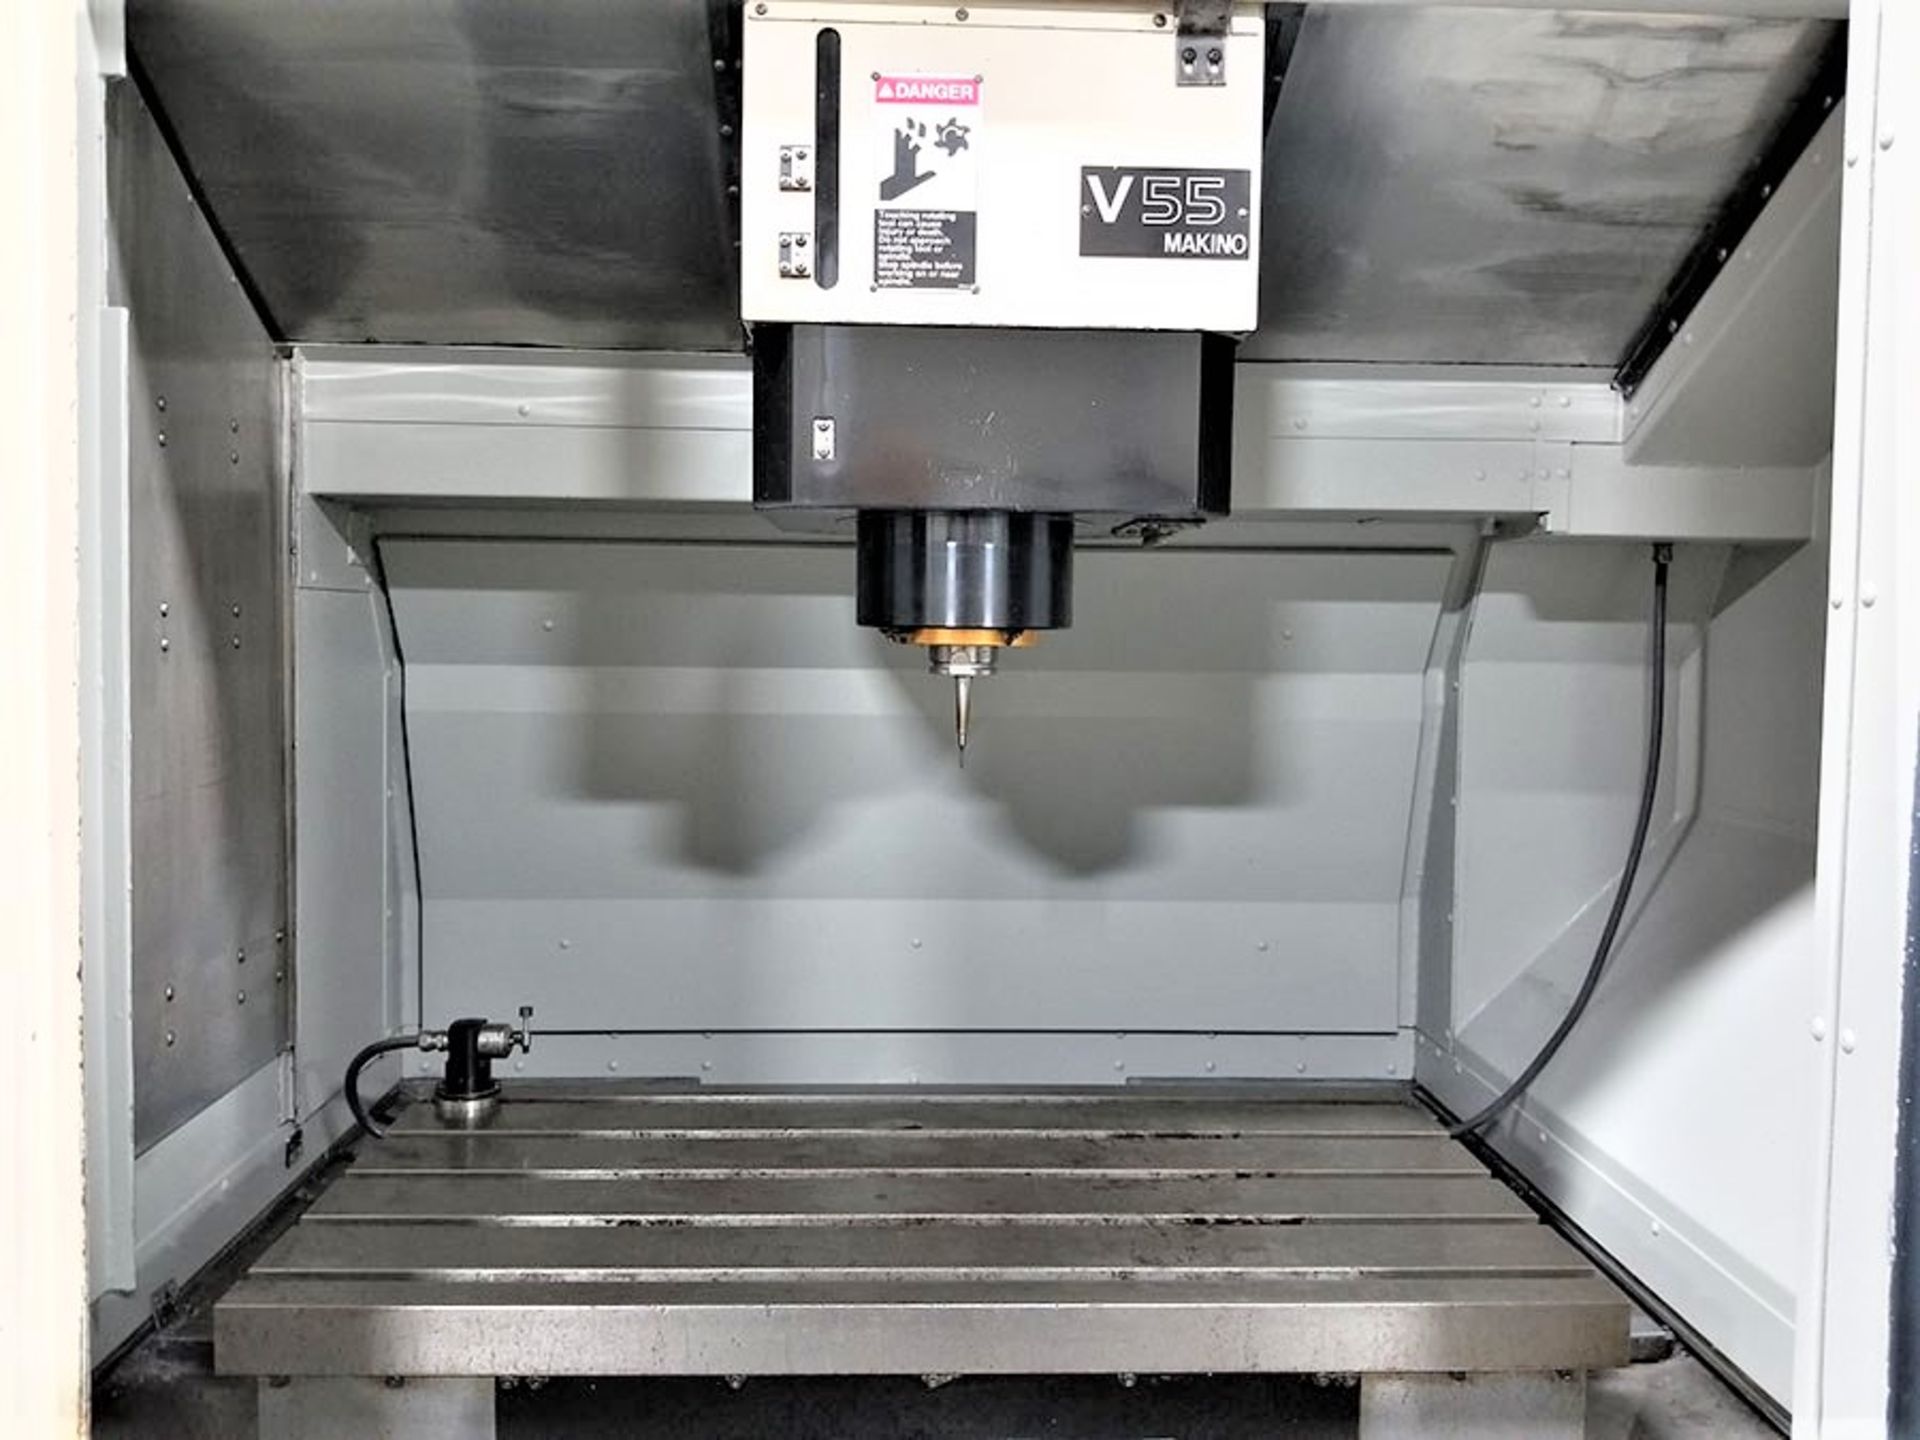 Makino V55 Precision 3-Axis CNC Vertical Machining Center, S/N 864, New 2000 - Image 6 of 14